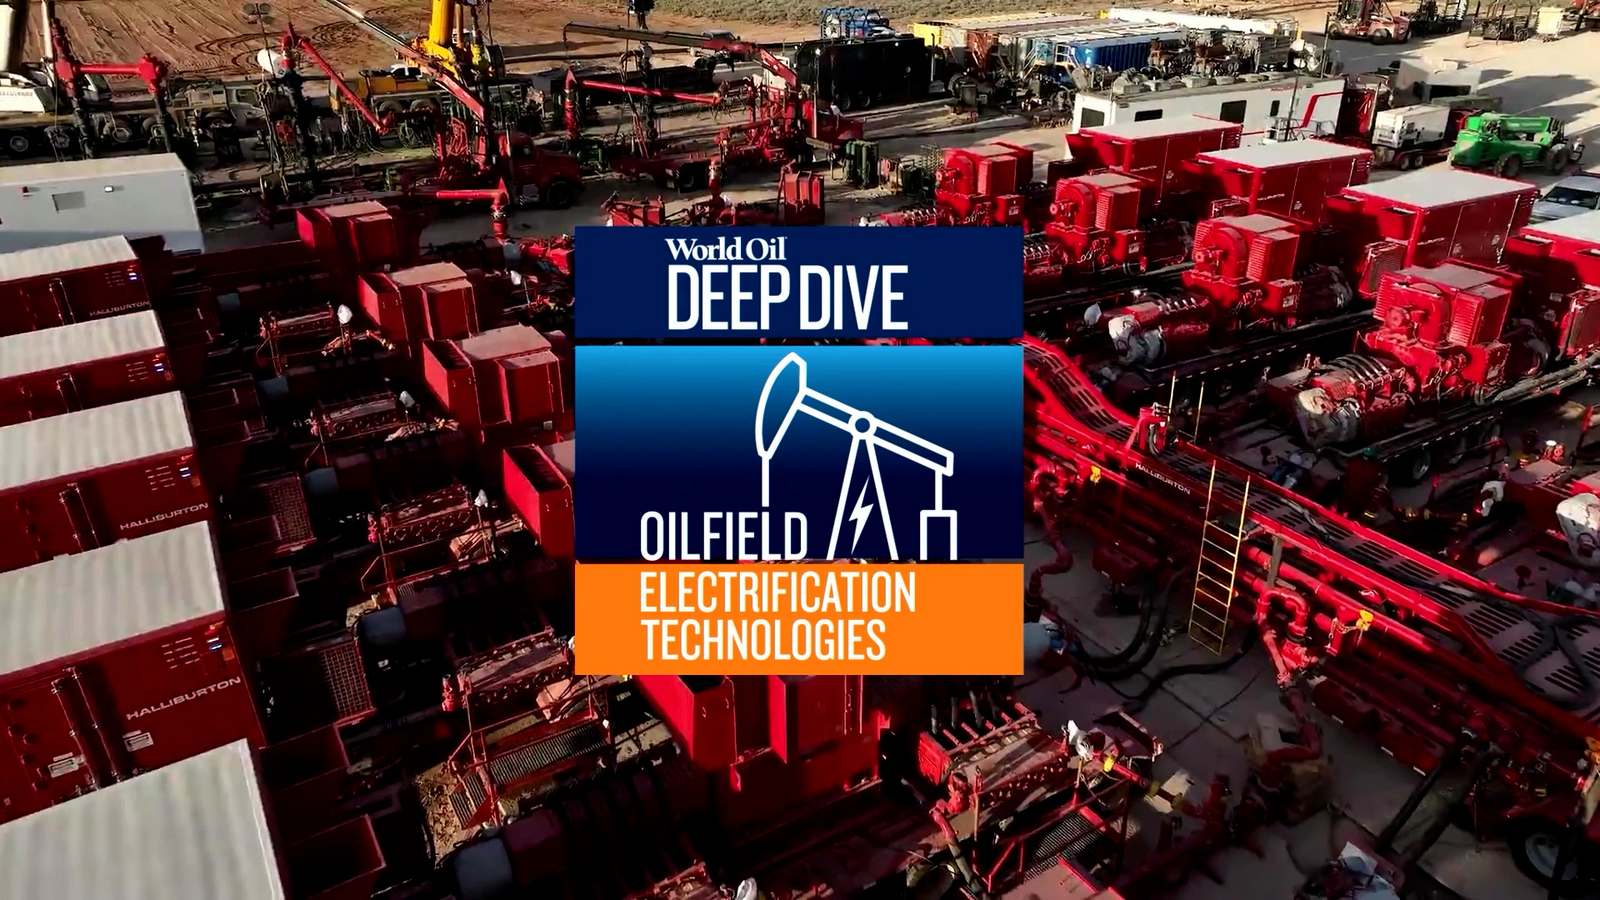 World Oil Deep Dive Podcast logo overlaid on top of Halliburton fracturing site background